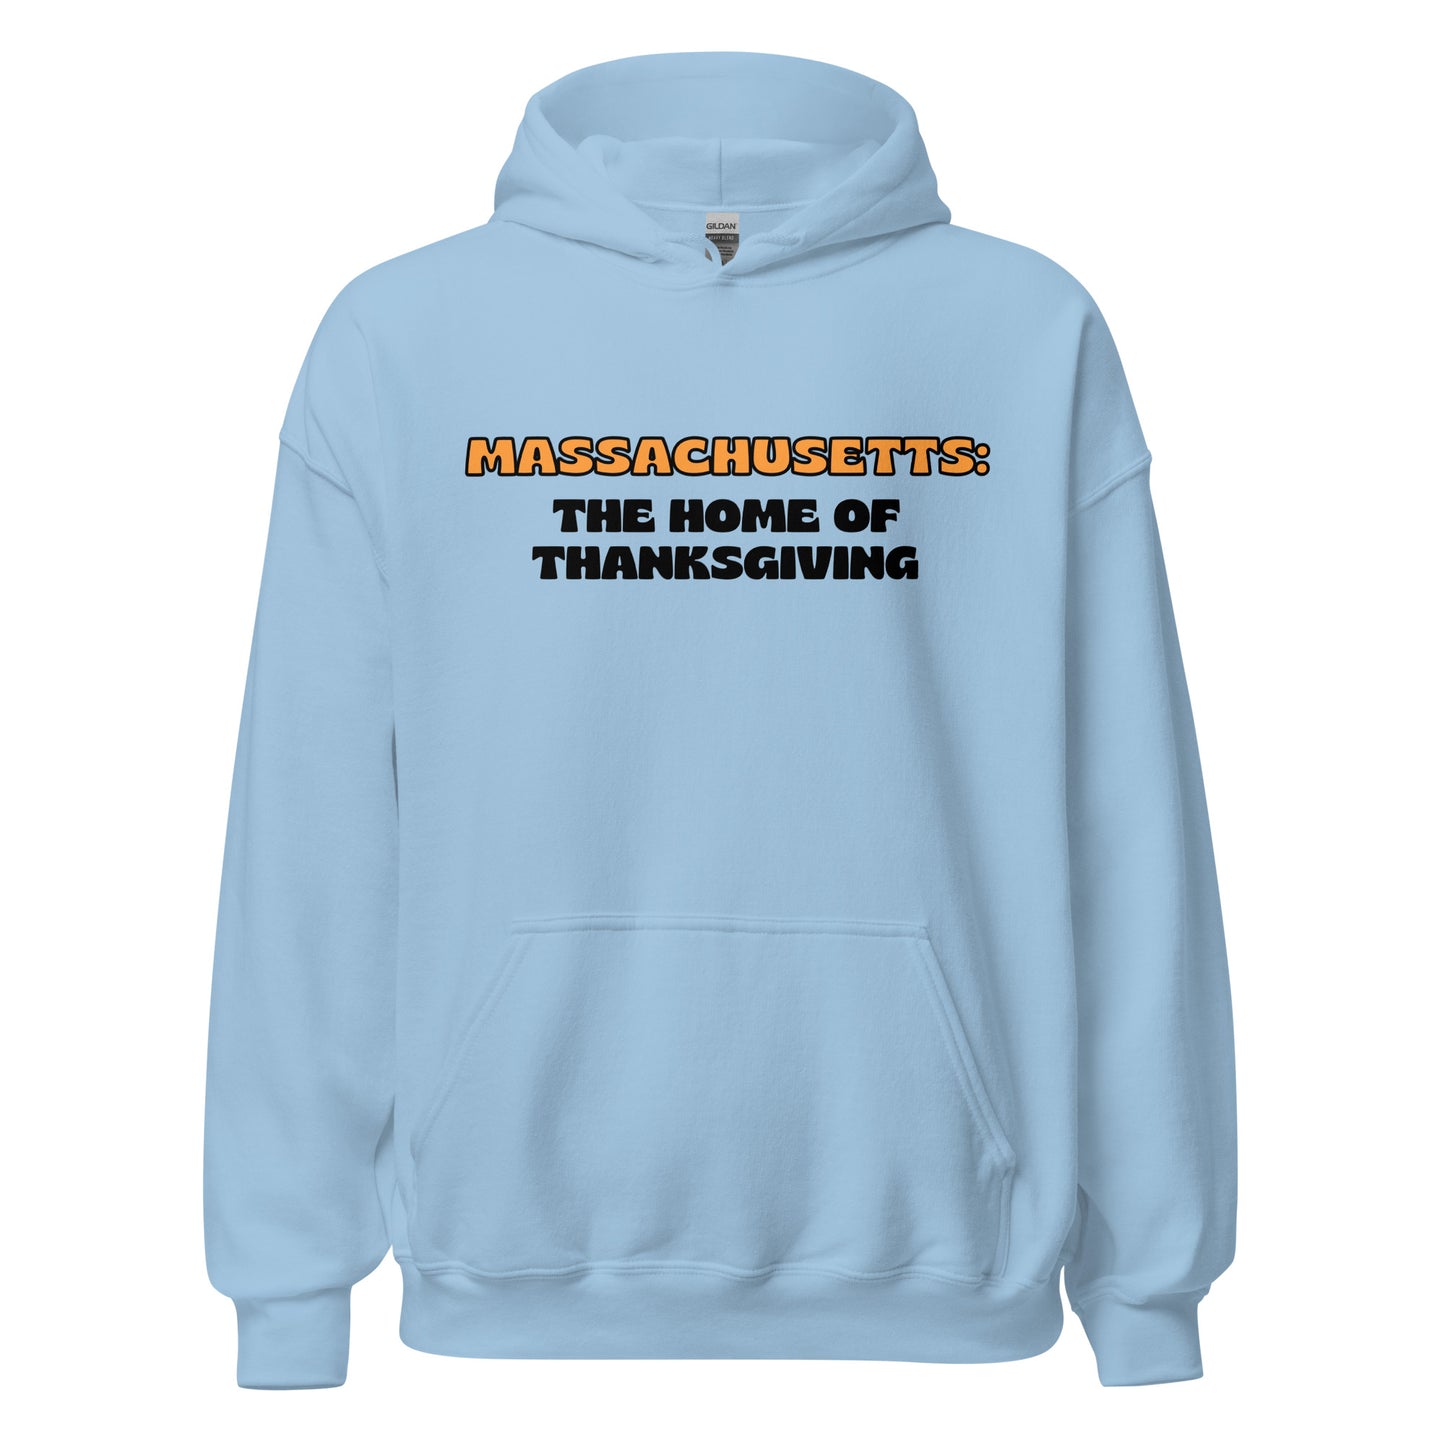 The Home of Thanksgiving Hoodie